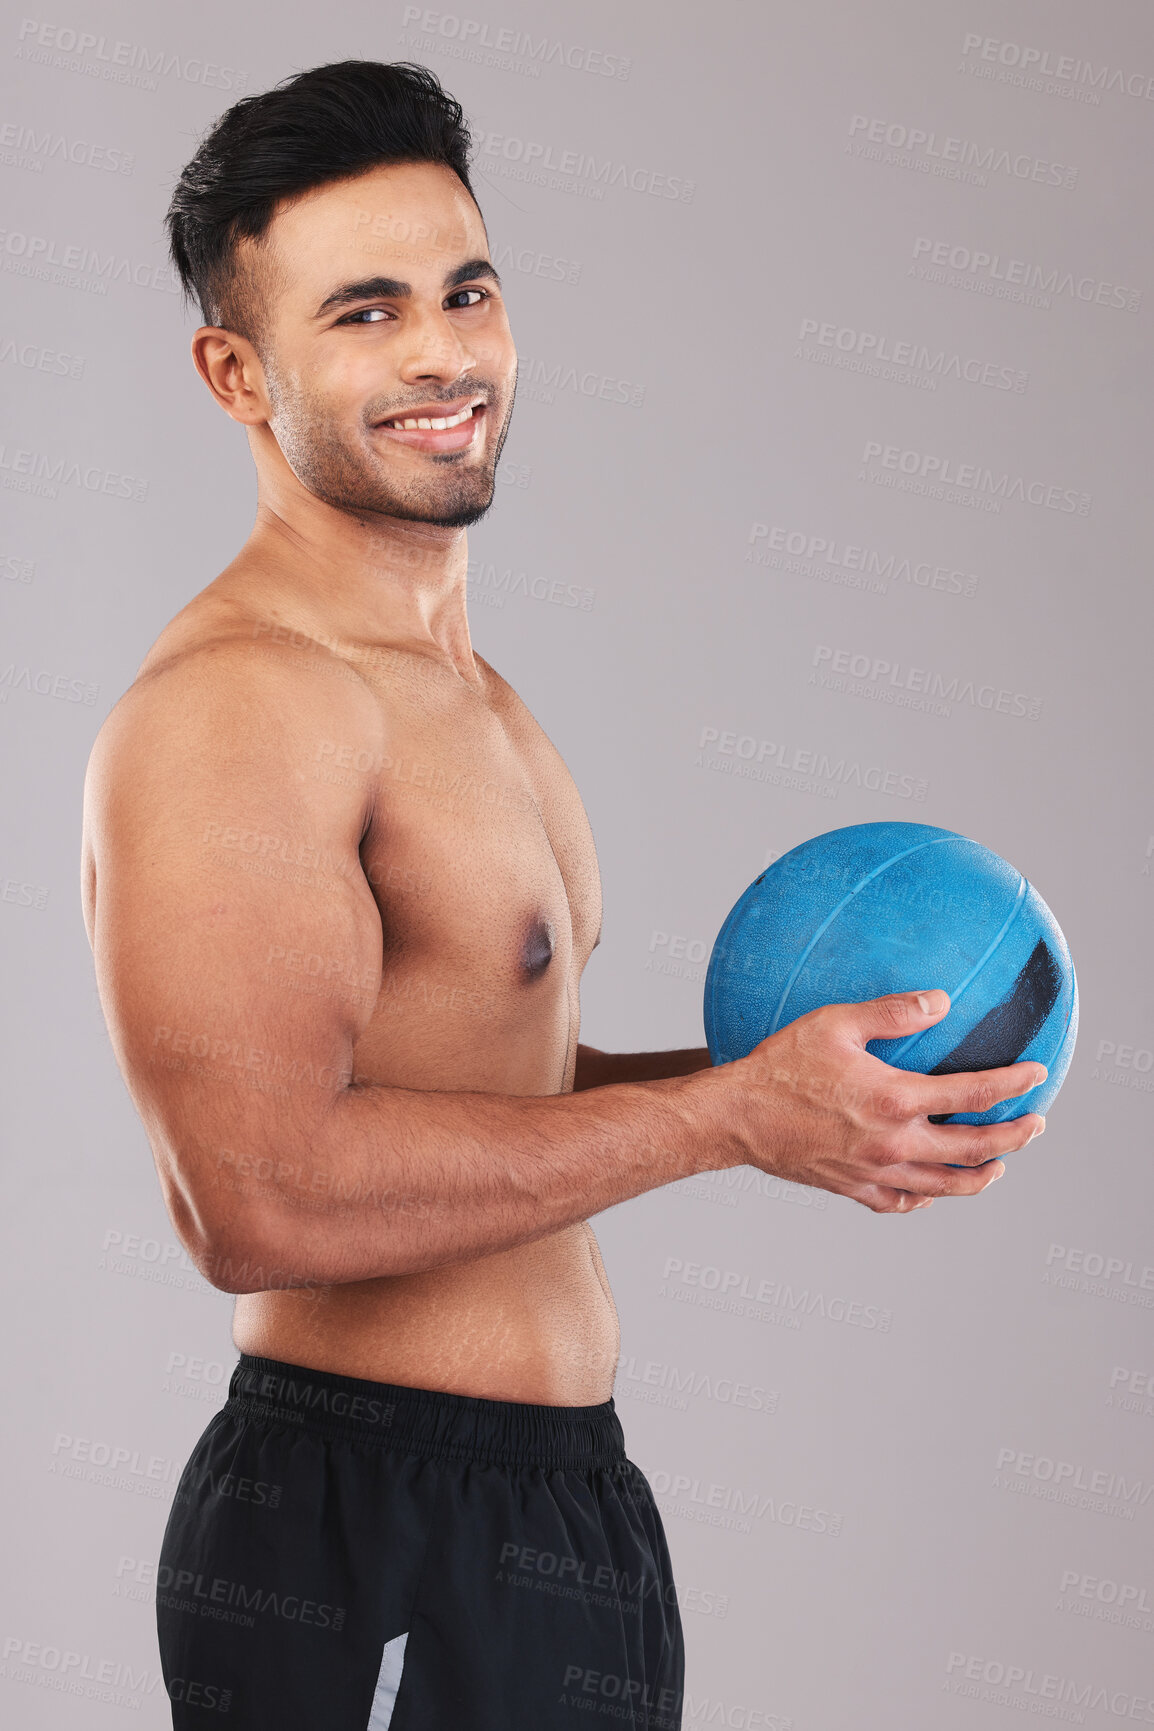 Buy stock photo Fitness, health and man with a ball for training, workout and sports against a grey mockup studio background. Happy, cardio and portrait of a young athlete with a smile for exercise and health